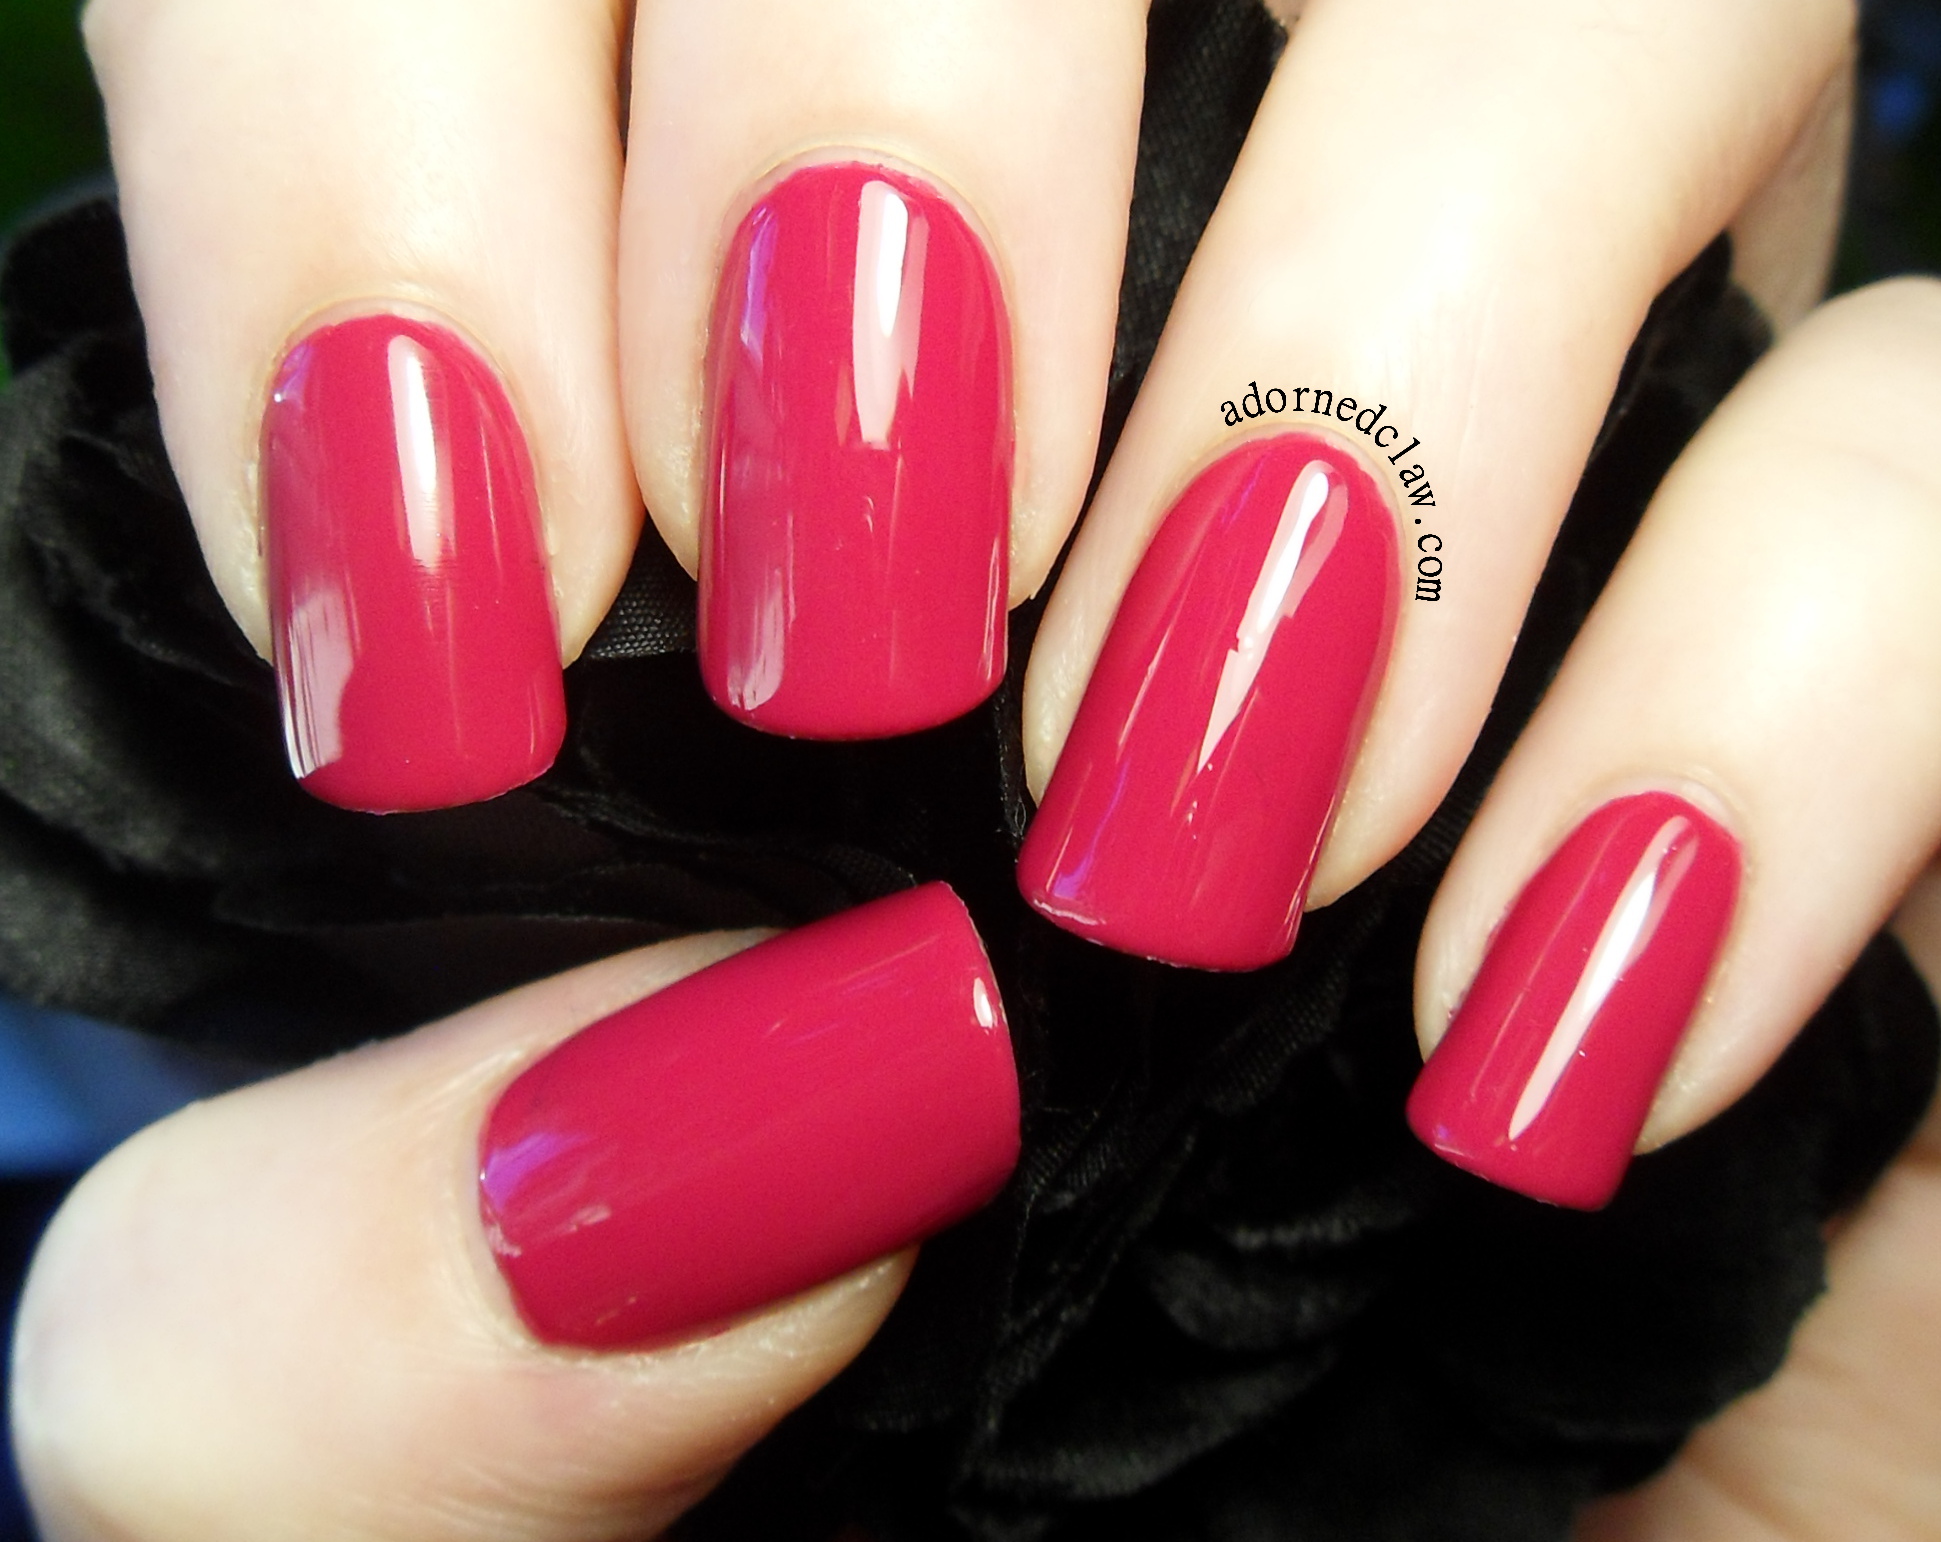 Red Nail Polish Color Options - wide 10